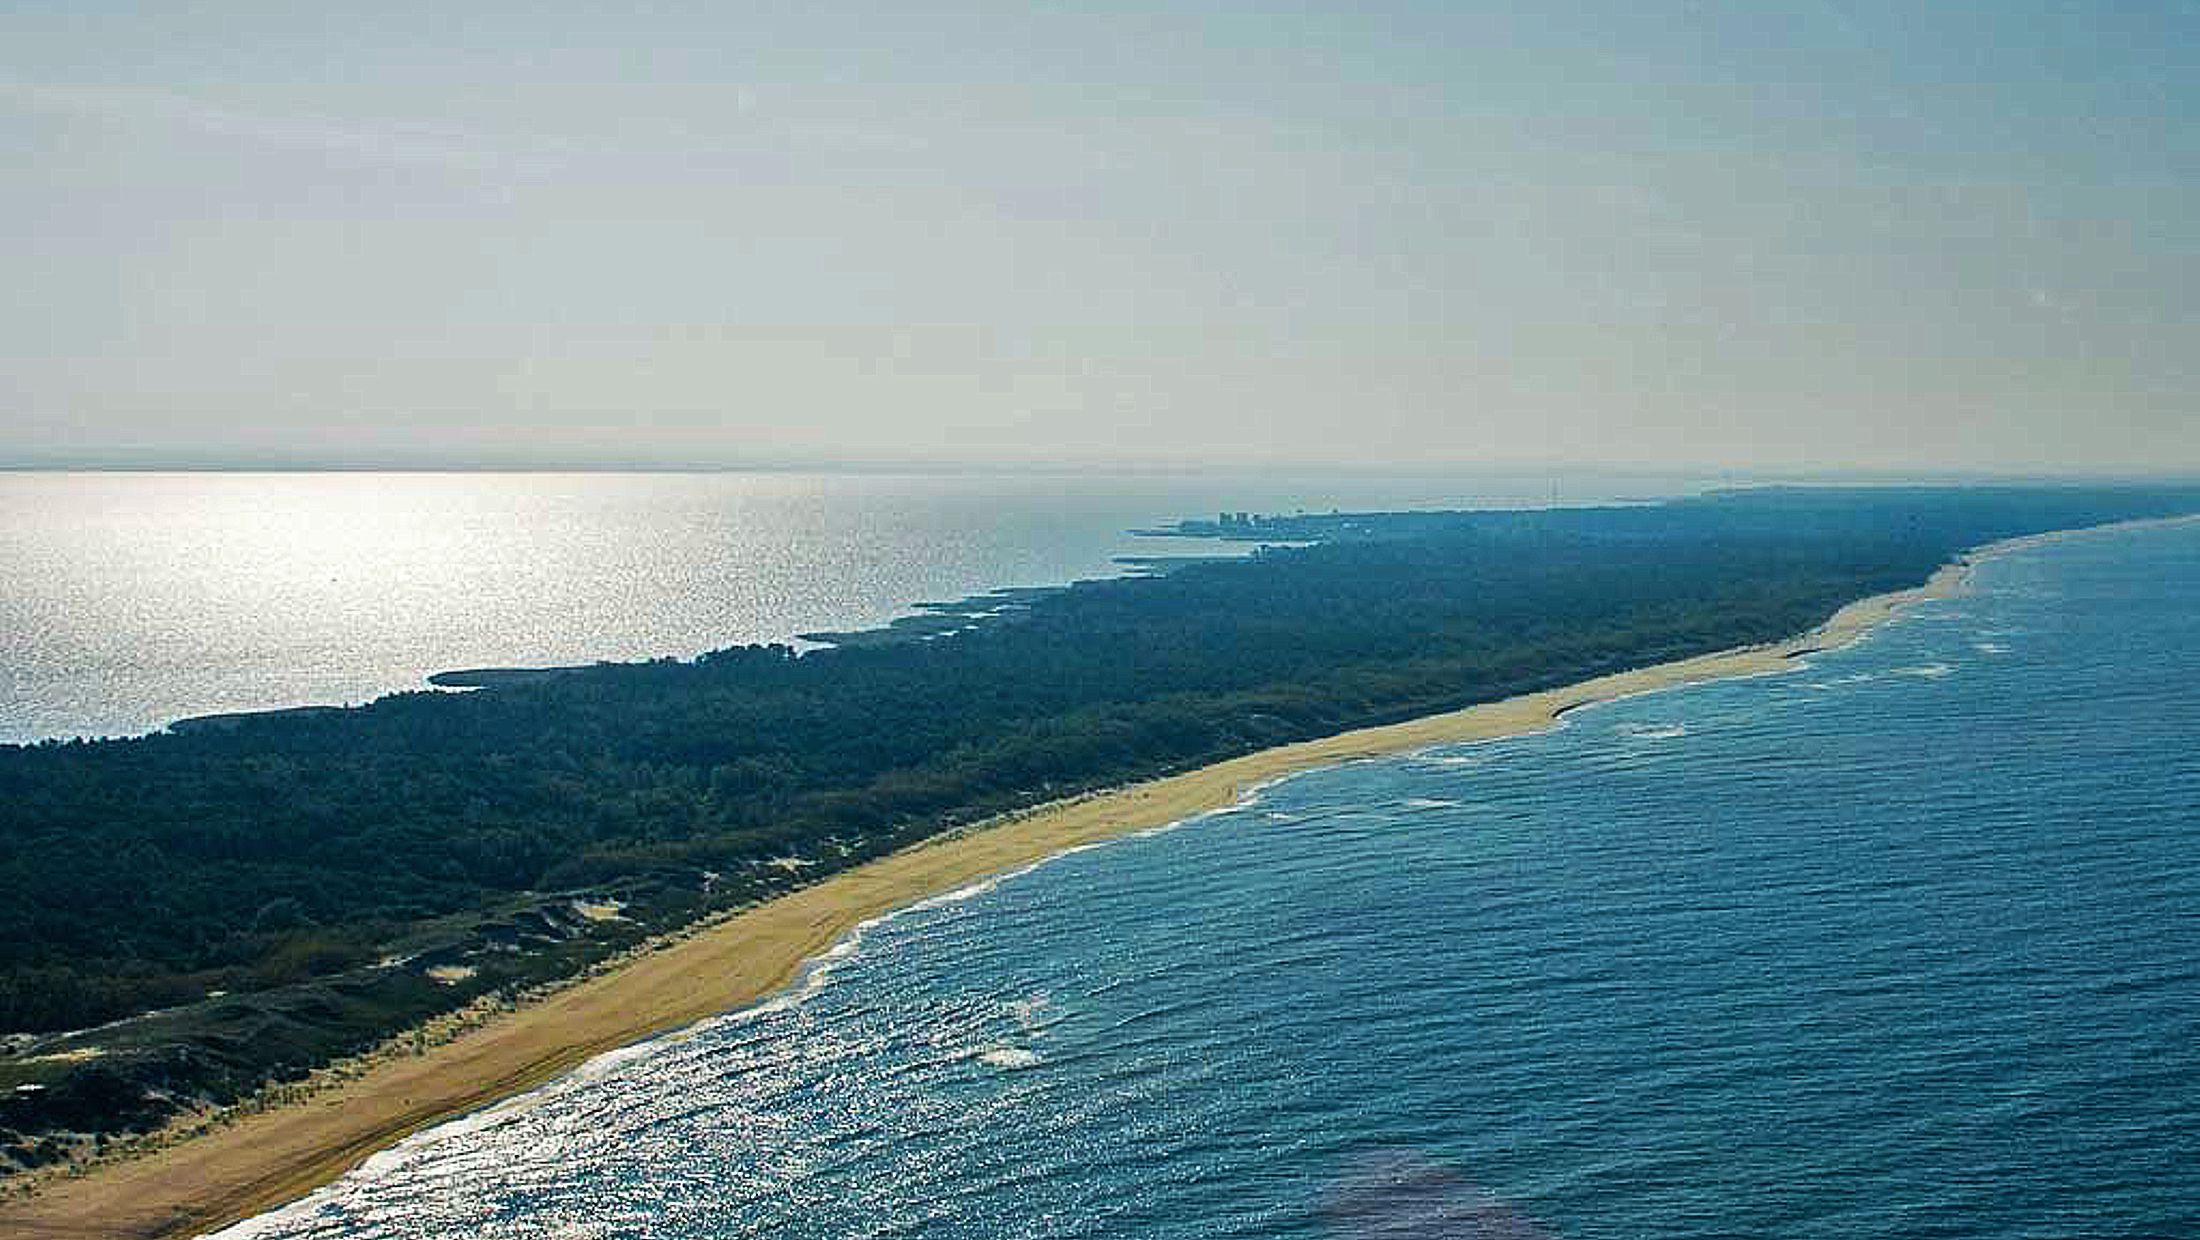 The Curonian spit